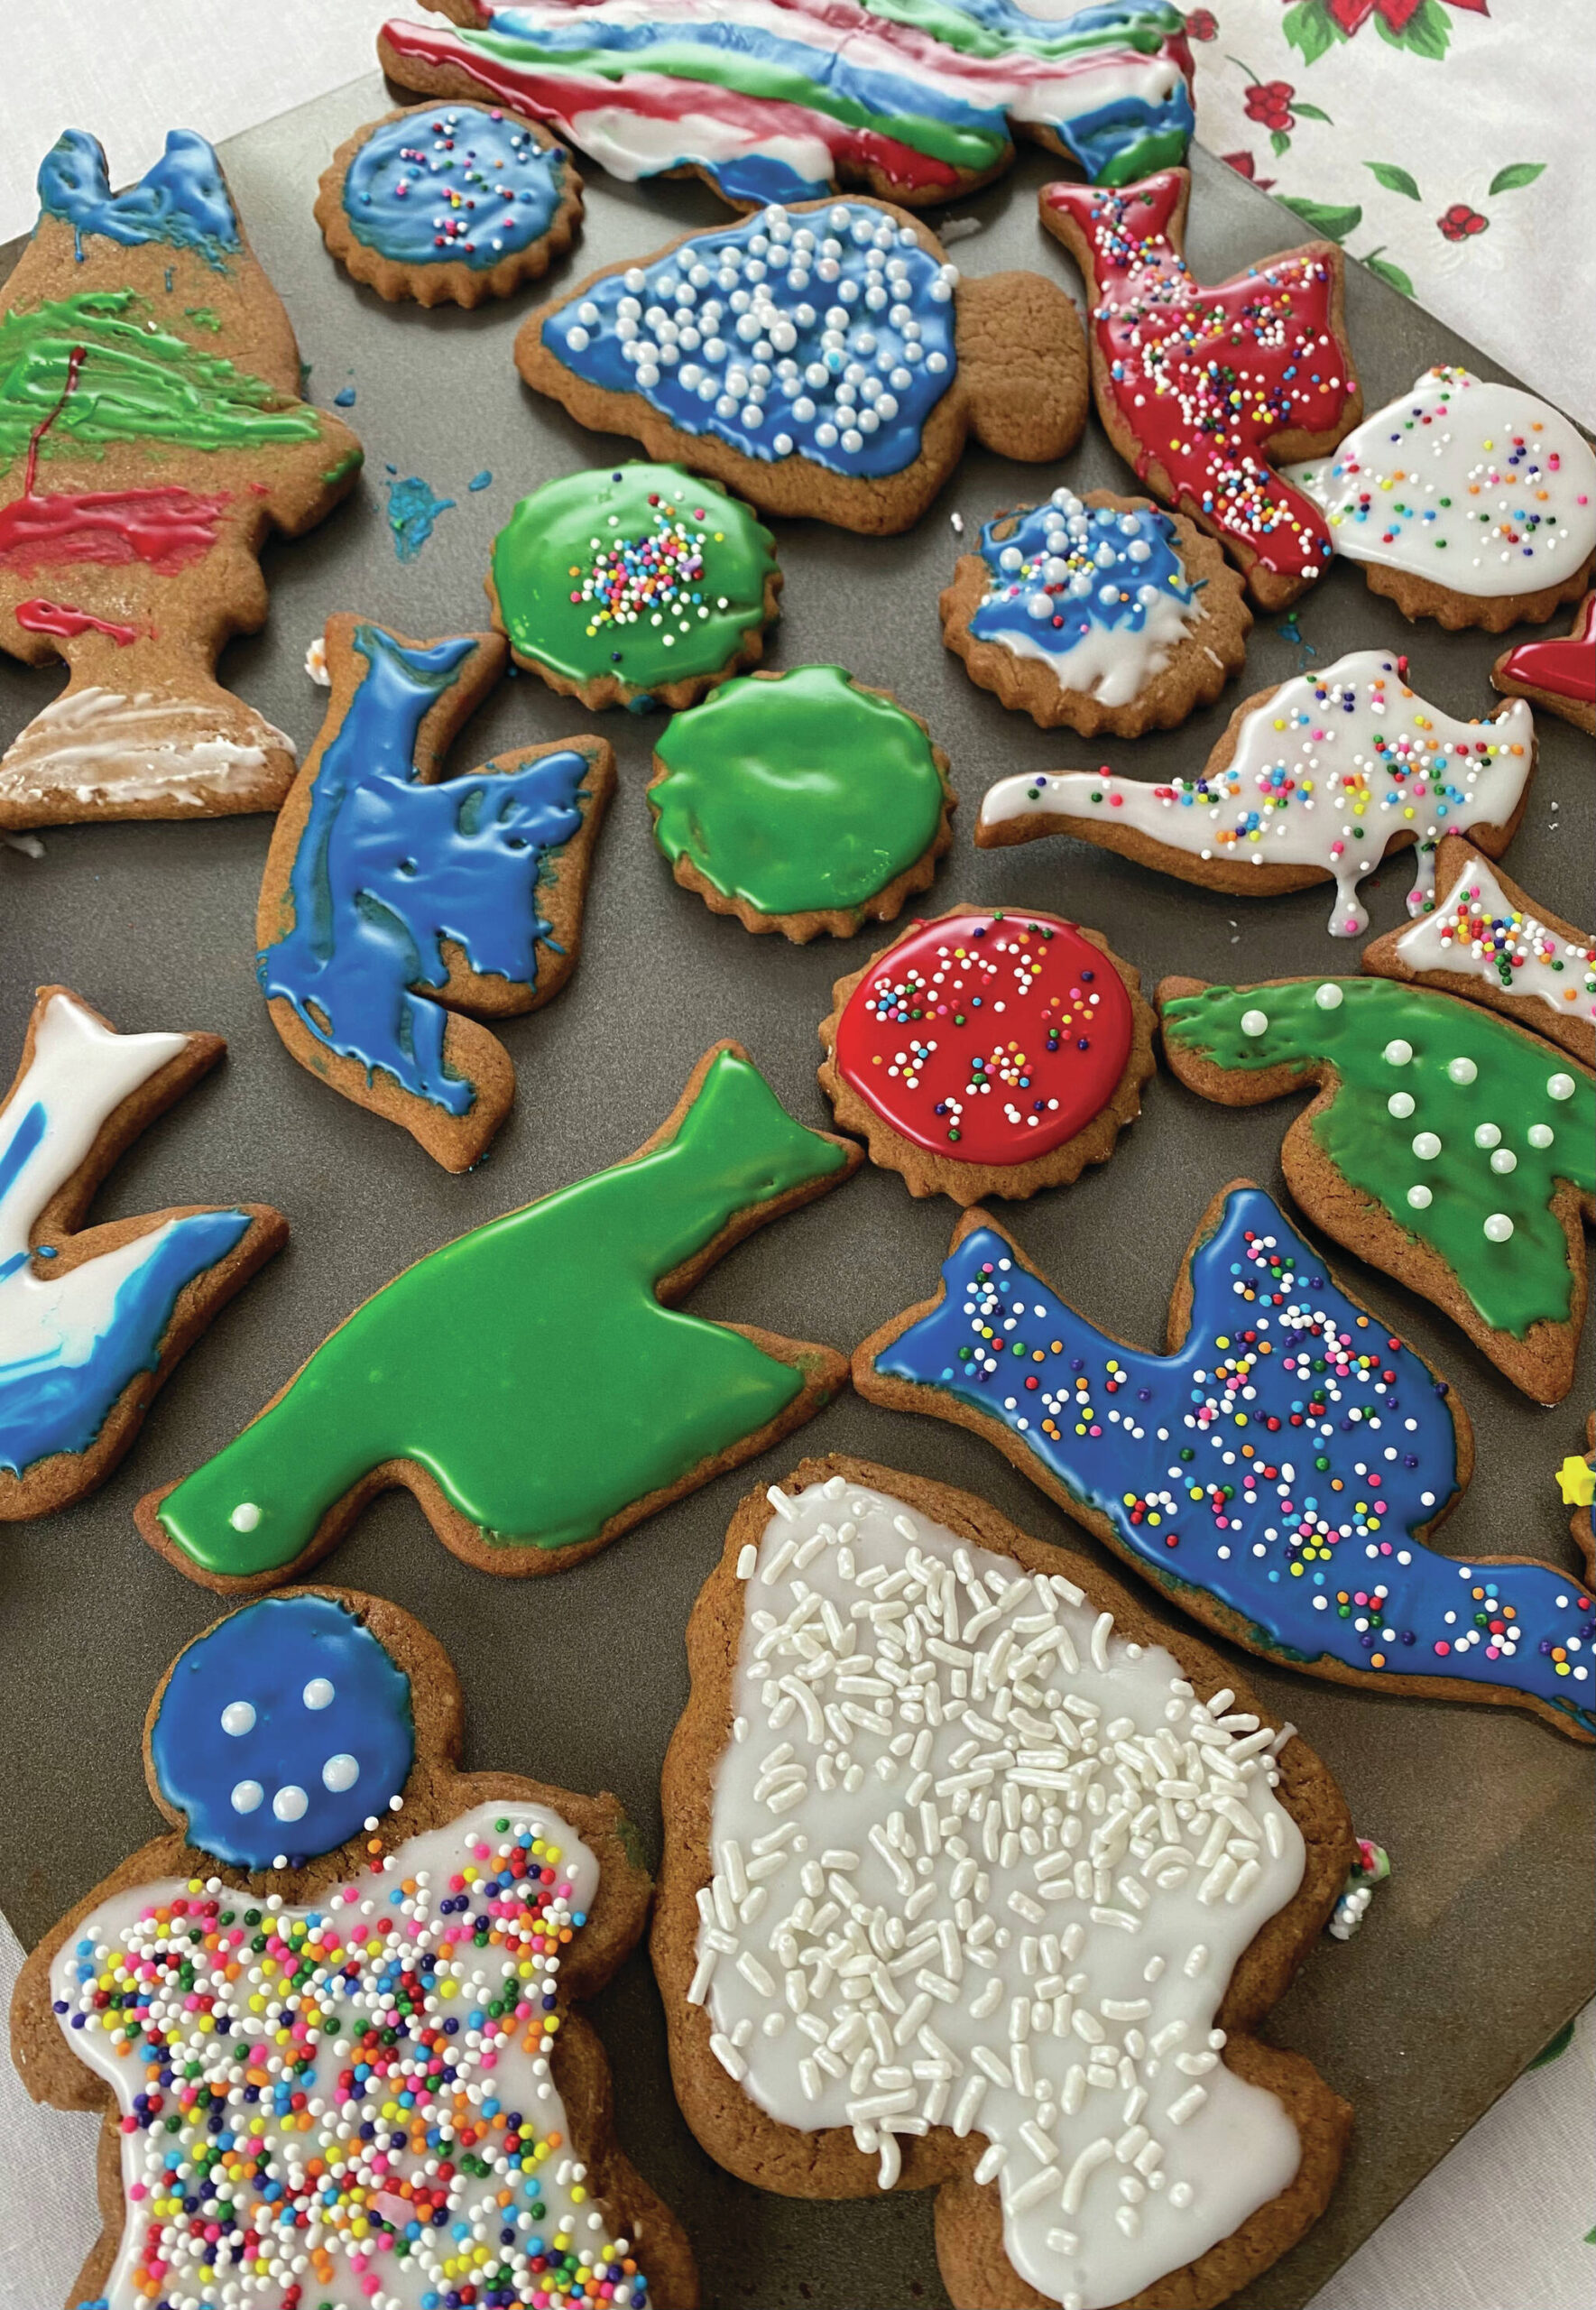 Photo by Tressa Dale/Peninsula Clarion
These festive gingerbread cookies are topped with royal icing and sprinkles.